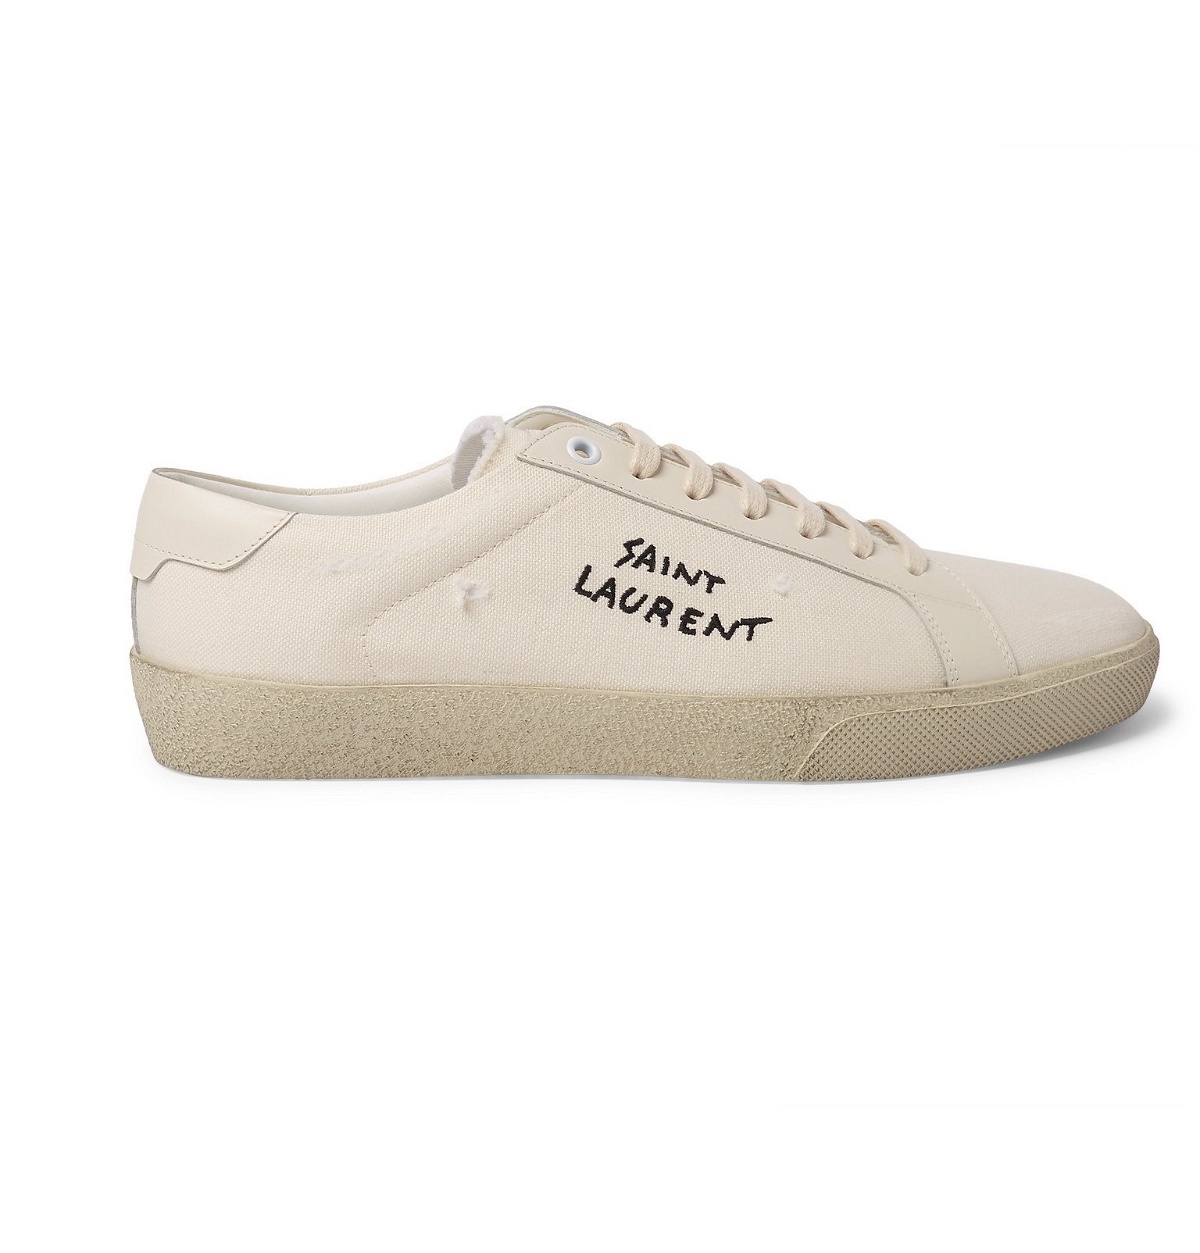 SAINT LAURENT - SL/06 Court Classic Leather-Trimmed Logo-Embroidered Distressed Canvas Sneakers - Neutrals